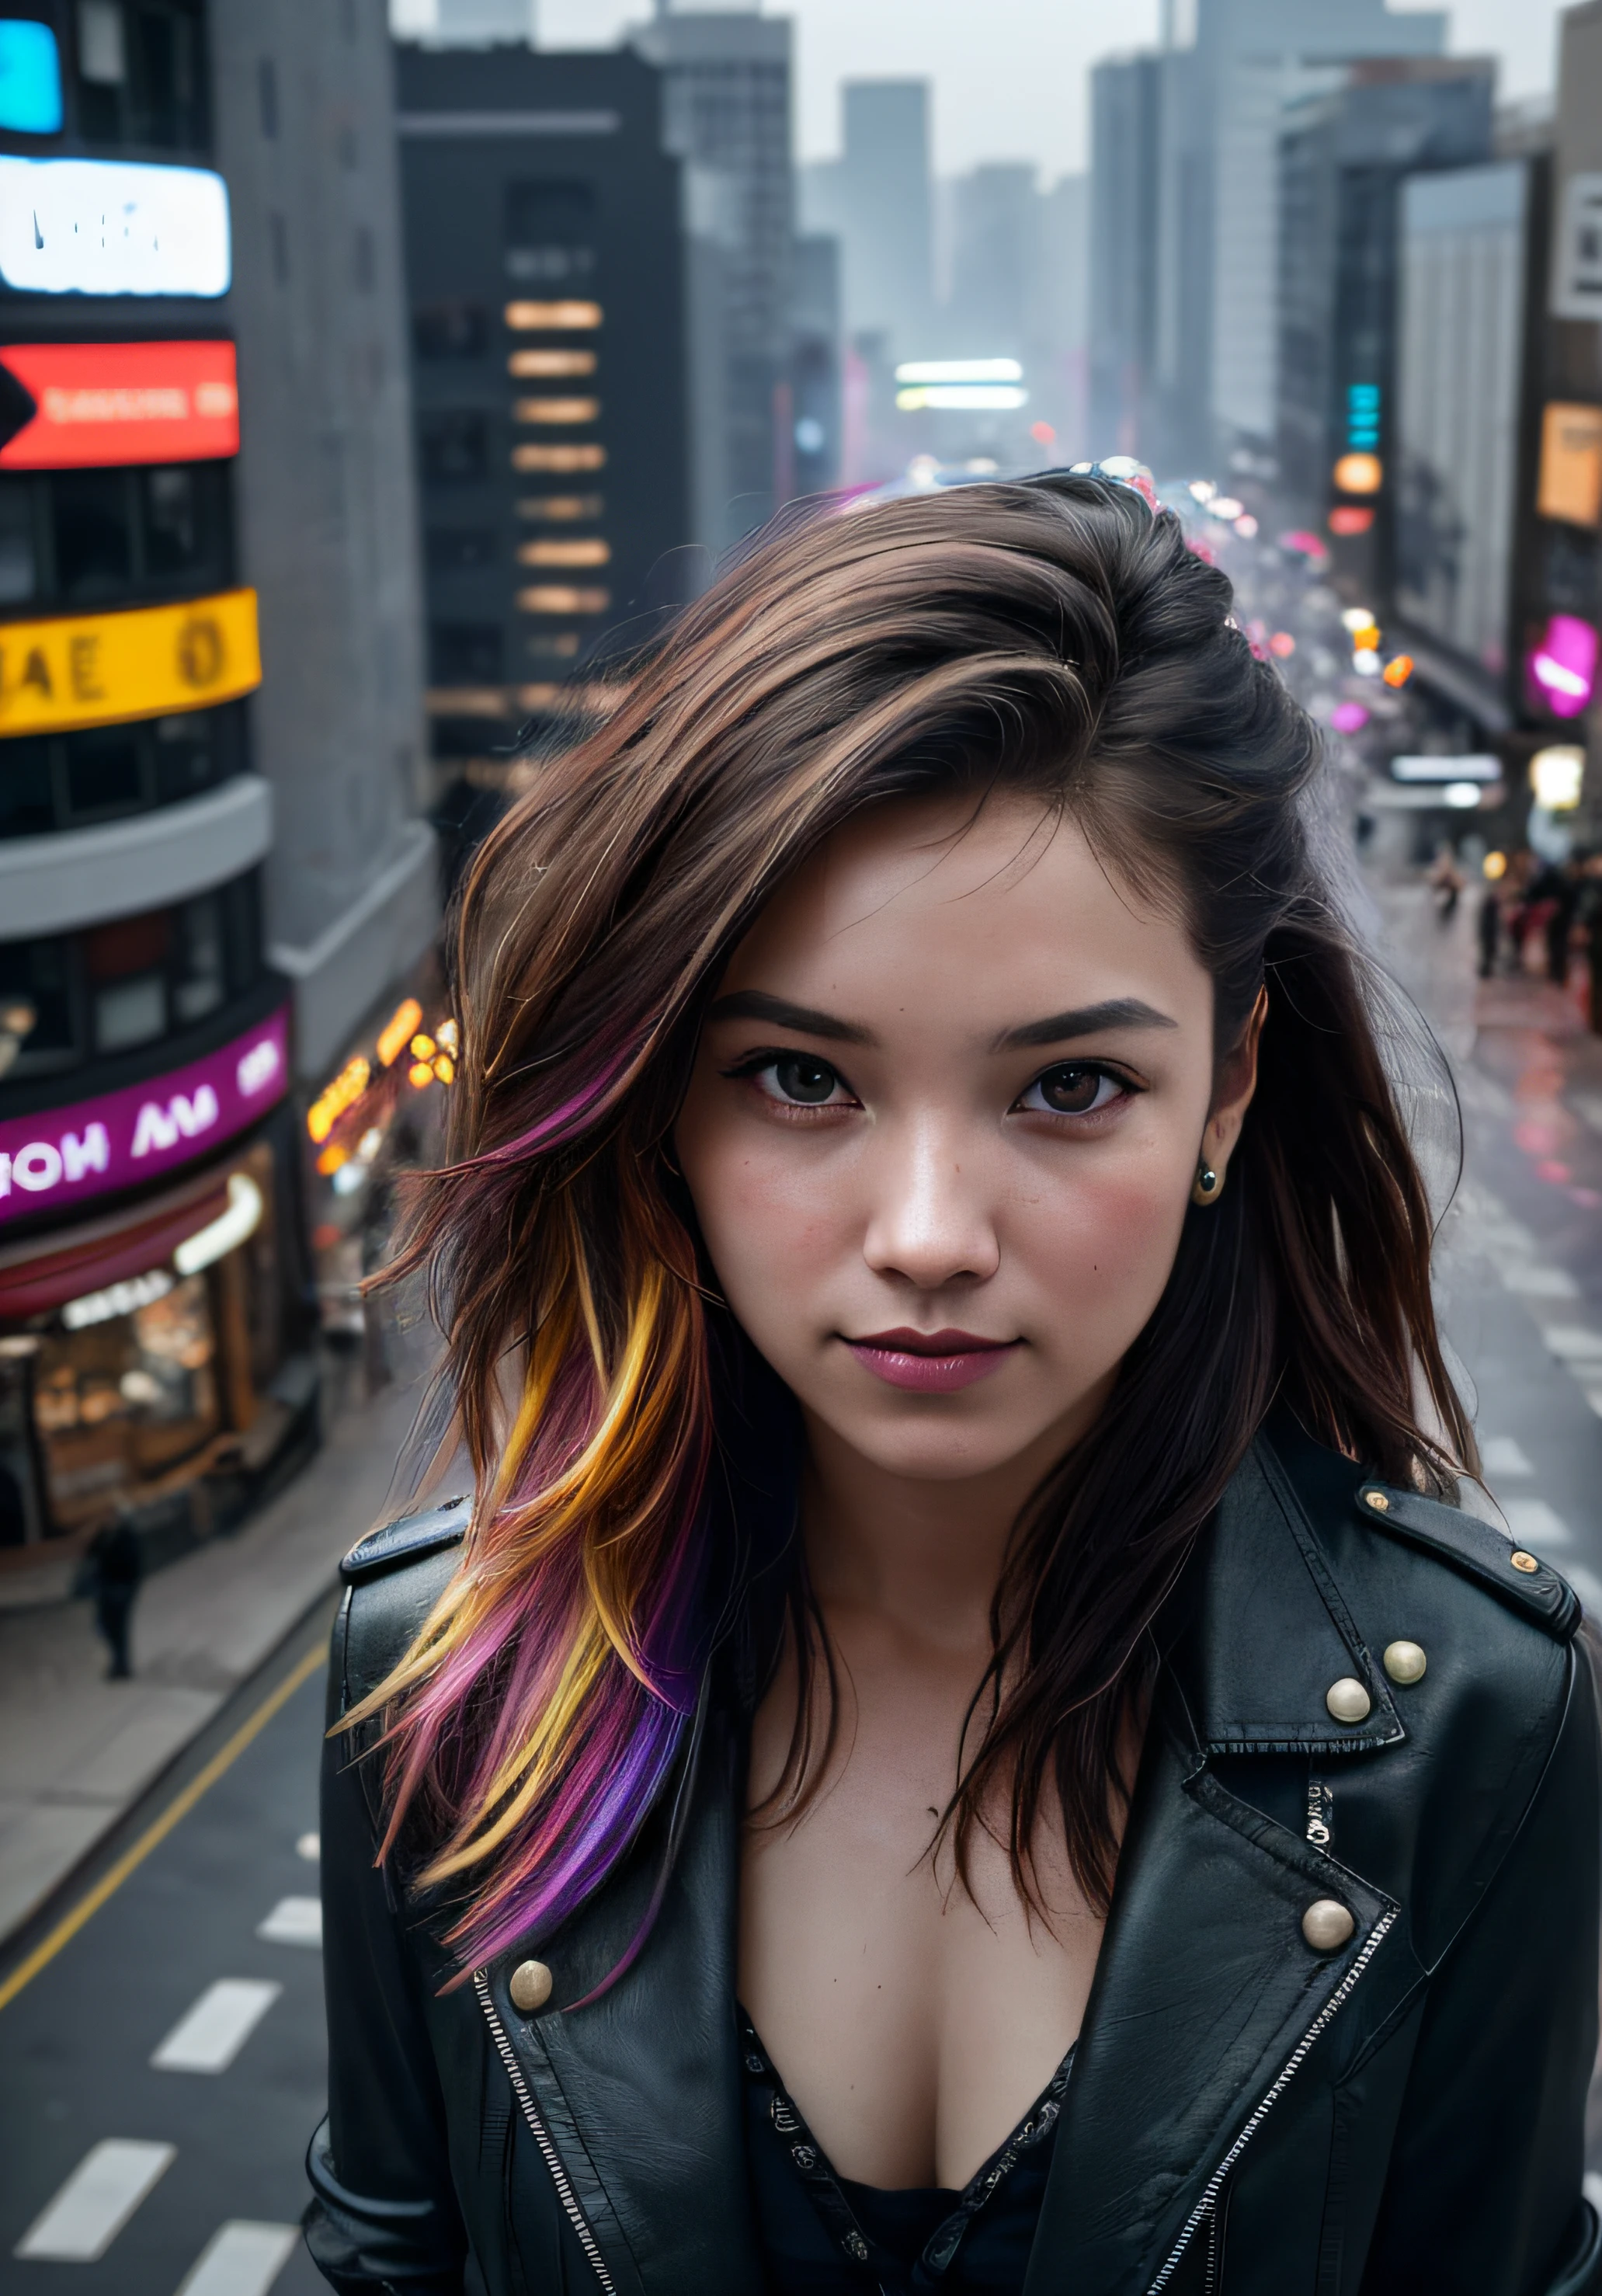 style, model shooting style, photo ((selfie: 1.8)) of a girl, 1girl, (cyberpunk: 1.8, cyberpunk city background: 1.8), ((cutest face: 1.8, perfect face: 1.3)), (multicolored long hair: 1.4, pale skin: 1.5),
(from above:1.2), best quality, epic (by Lee Jeffries Photo, Sony A7, 50mm, pores:1.5, colors, hyper-detailed:1.5, film grain:1.4,
hyperrealistic: 1.5), hyper-realistic texture, masterpiece, unreal engine 5, extremely detailed 8k CG wallpaper, 
Crazy detailed photo, hyperrealistic light, (Pulitzer Prize Winner for Photography and Taylor Wessing Photo Award)